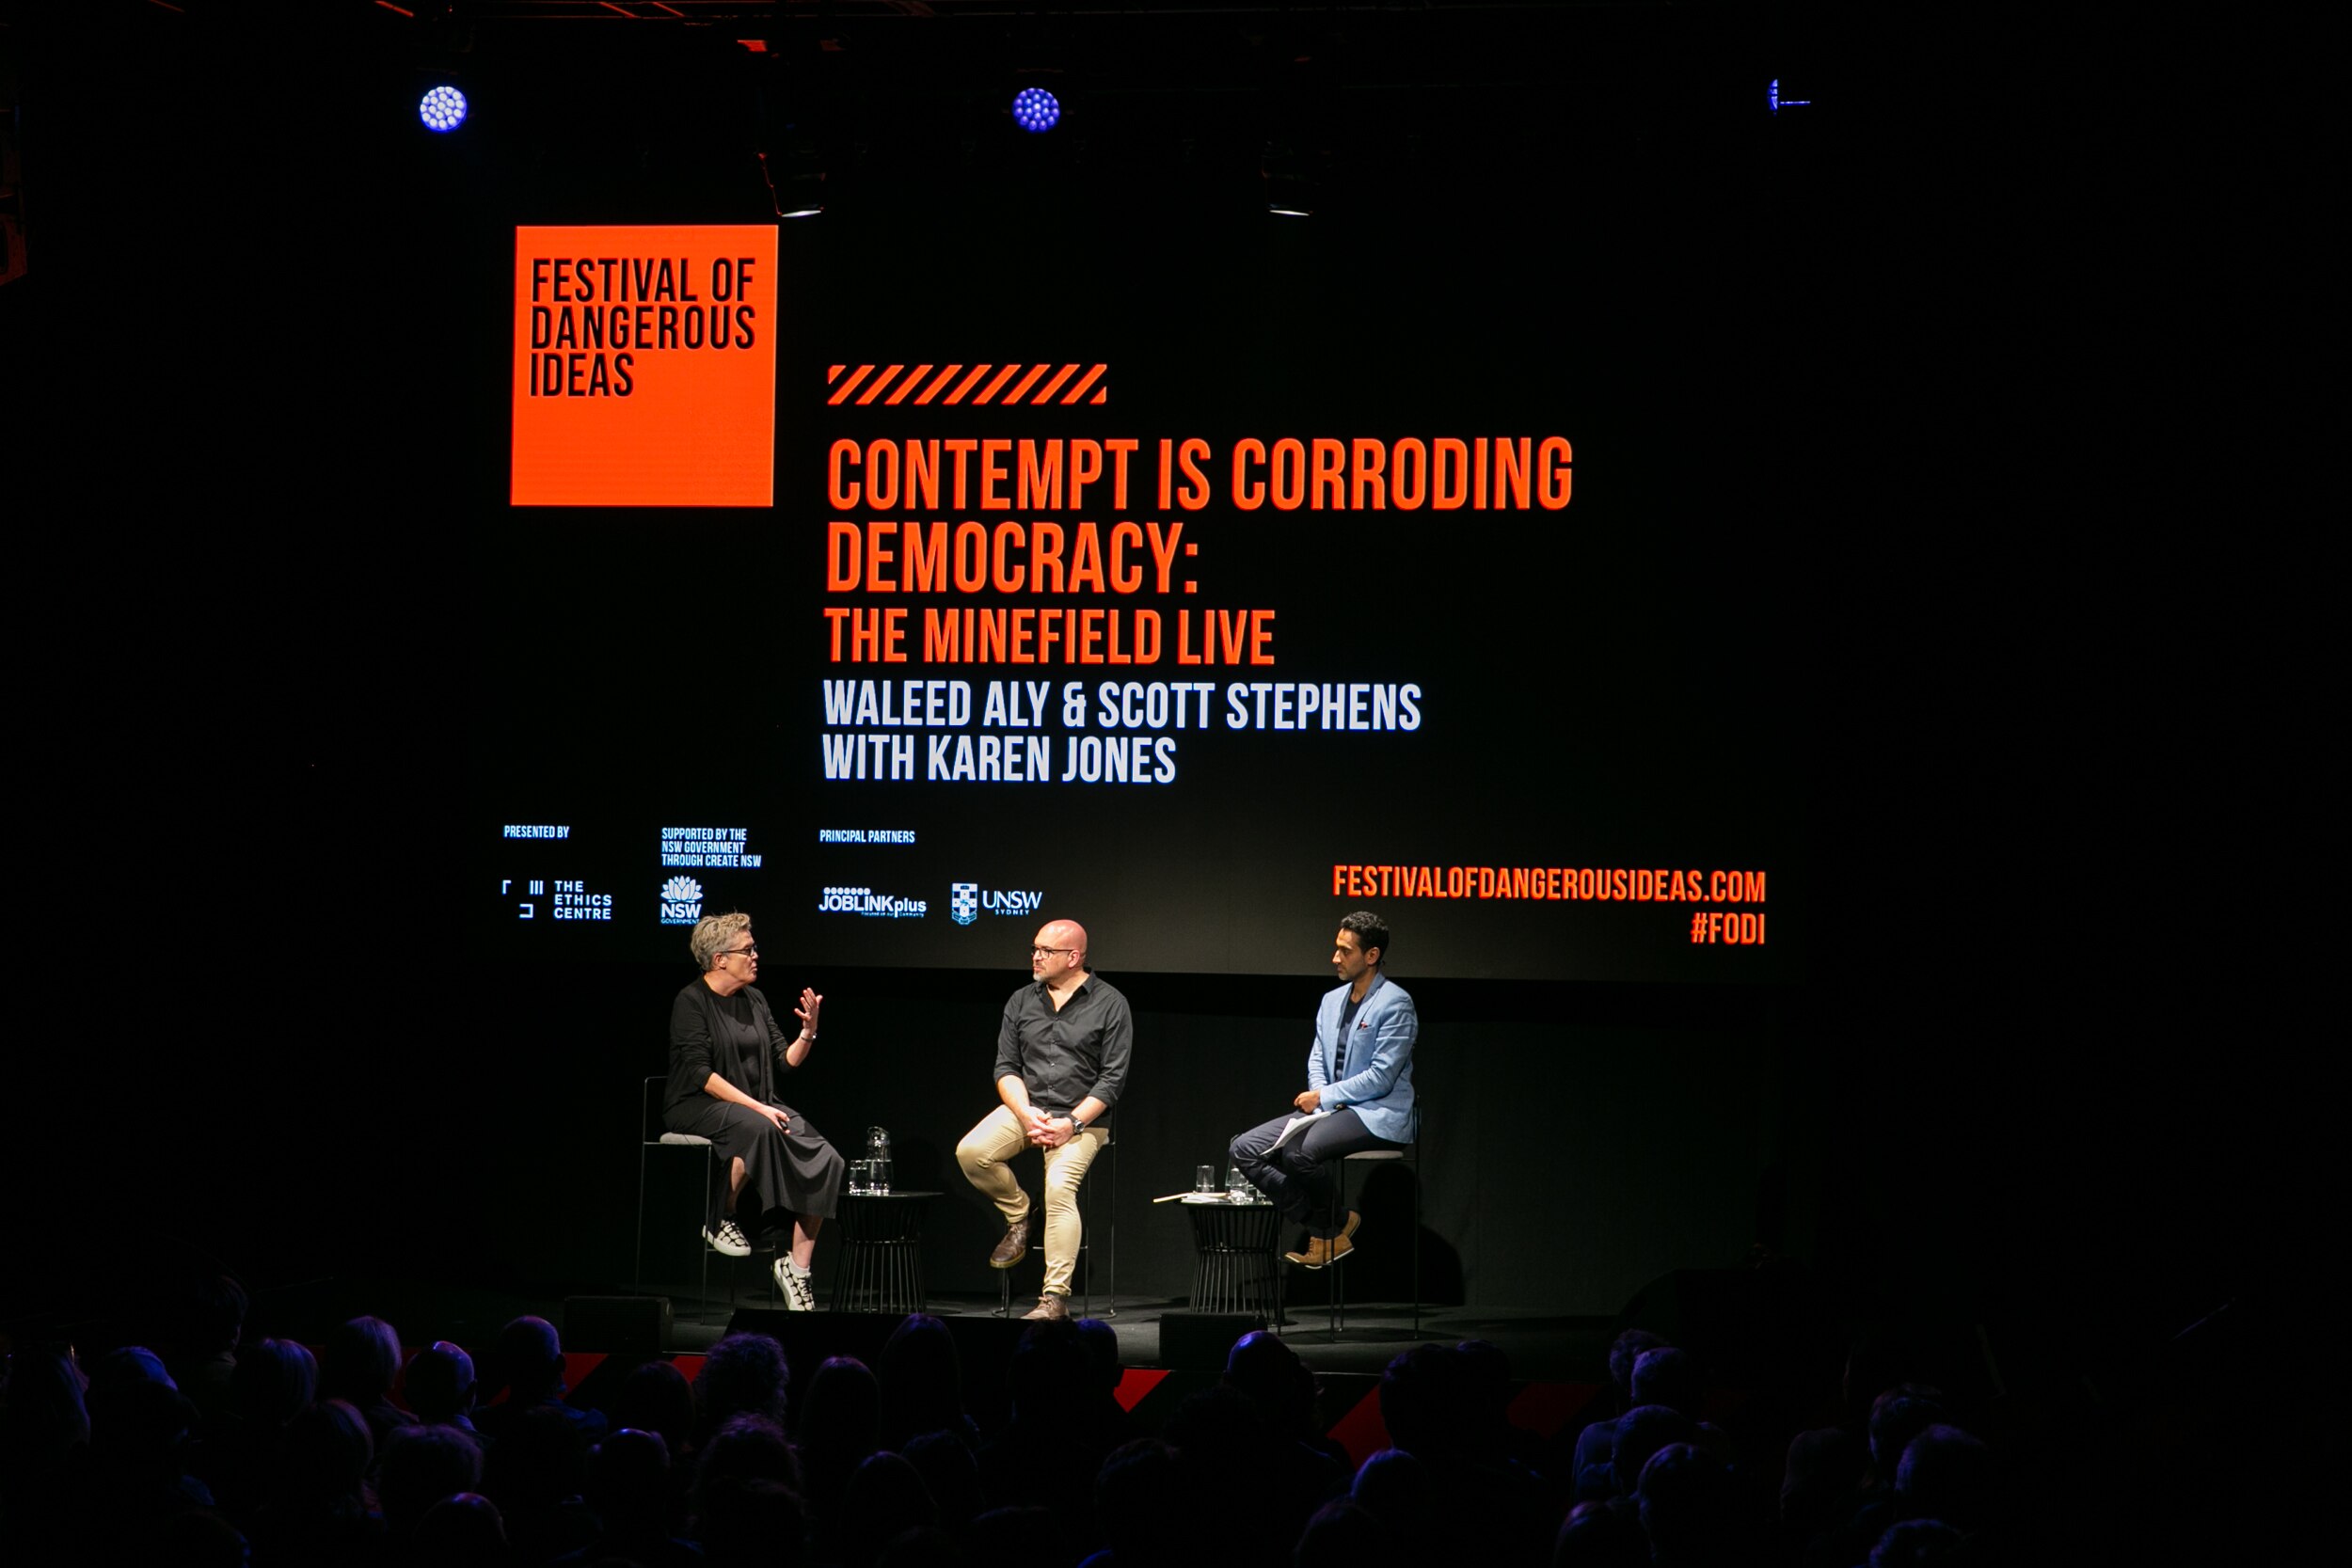 Live from the Festival of Dangerous Ideas: Is contempt corroding democracy?